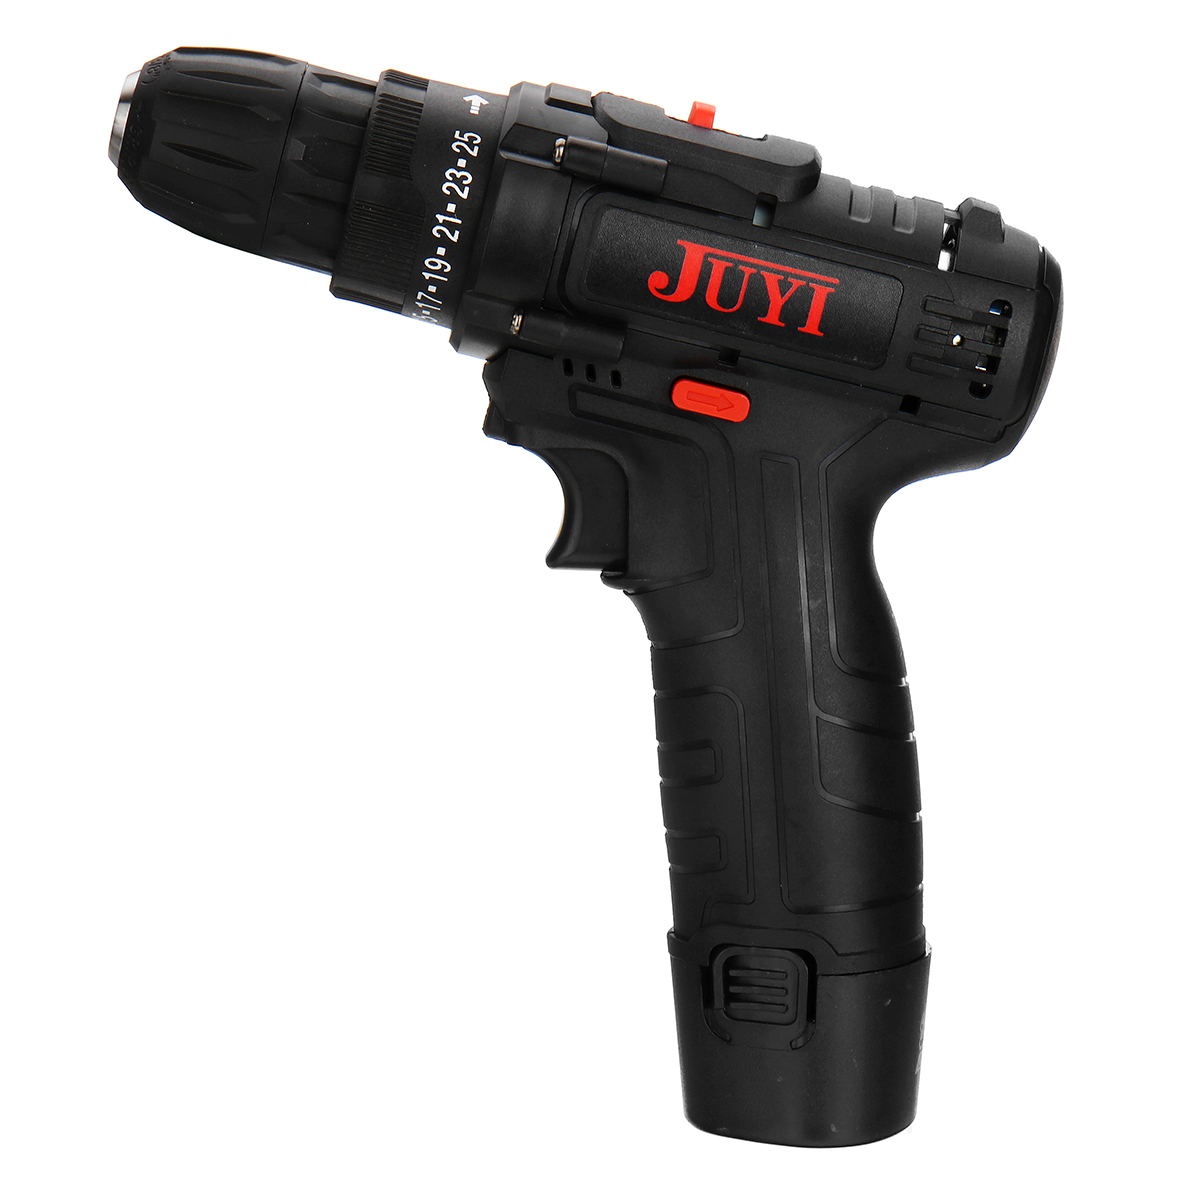 JUYI-12V24V-Lithium-Battery-Power-Drill-Cordless-Rechargeable-2-Speed-Electric-Driver-Drill-Motor-Re-1557976-8